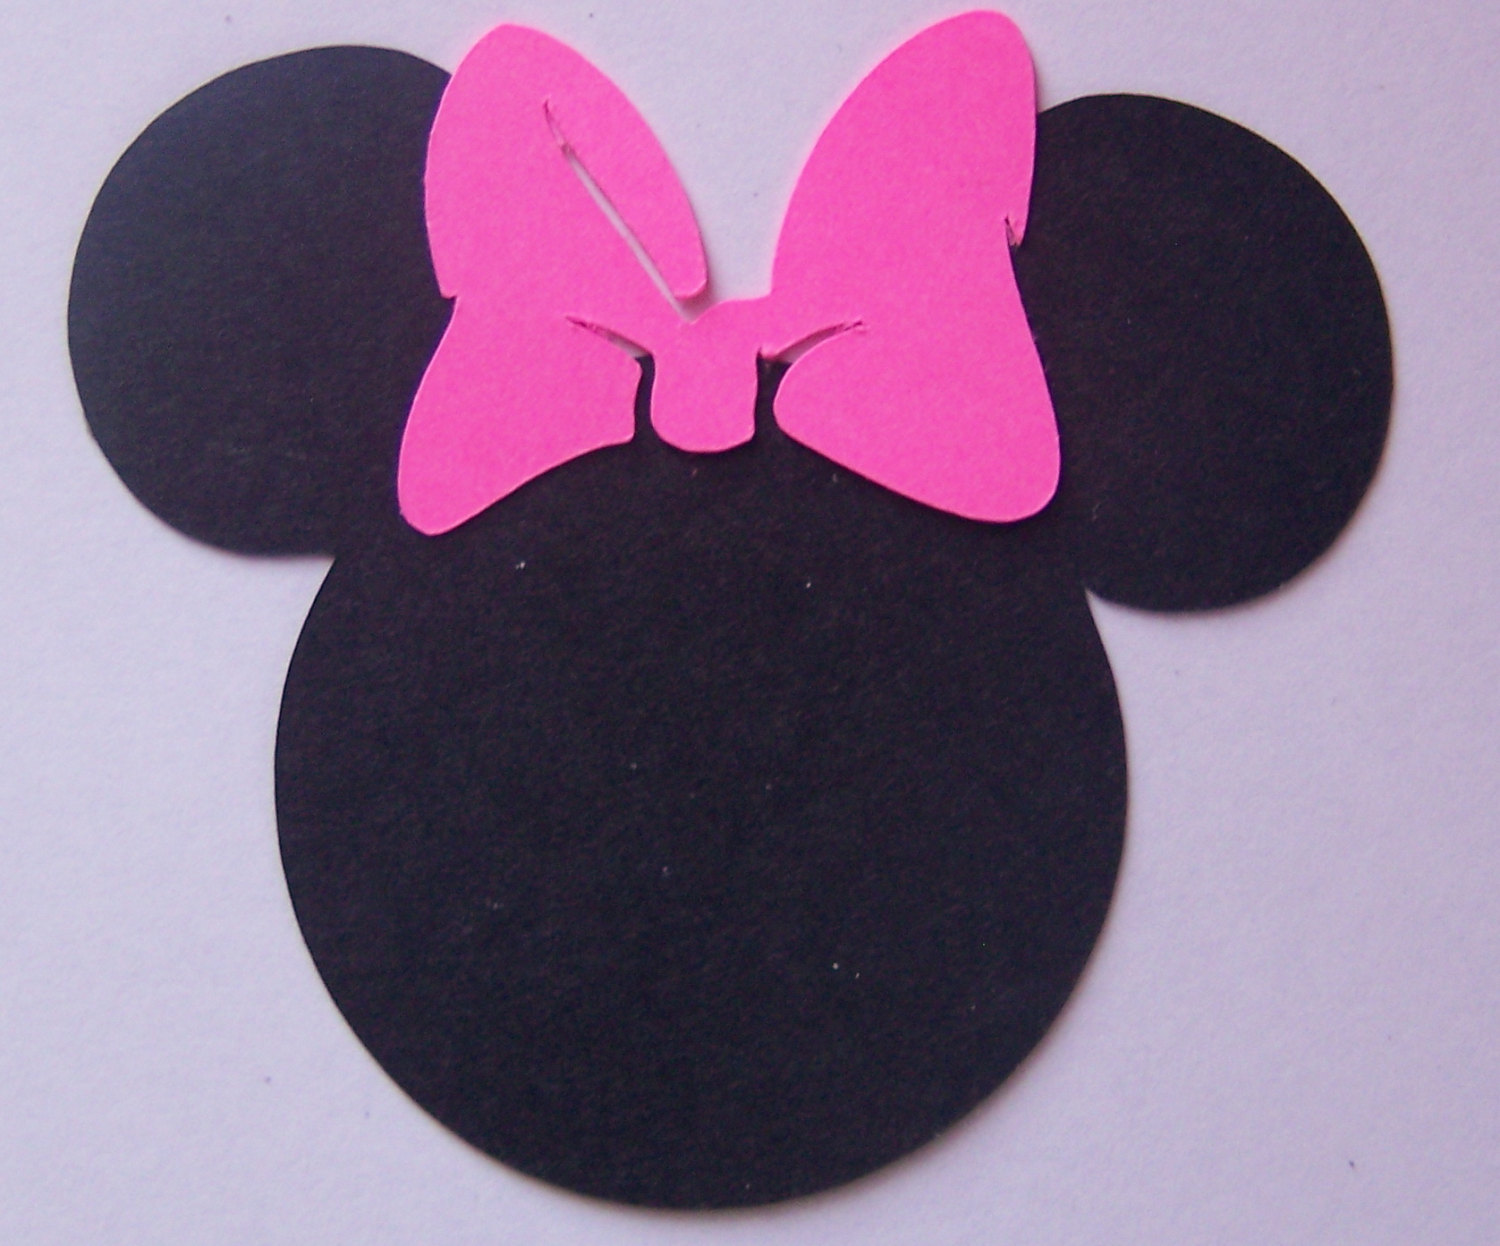 Popular items for minnie mouse heads on Etsy